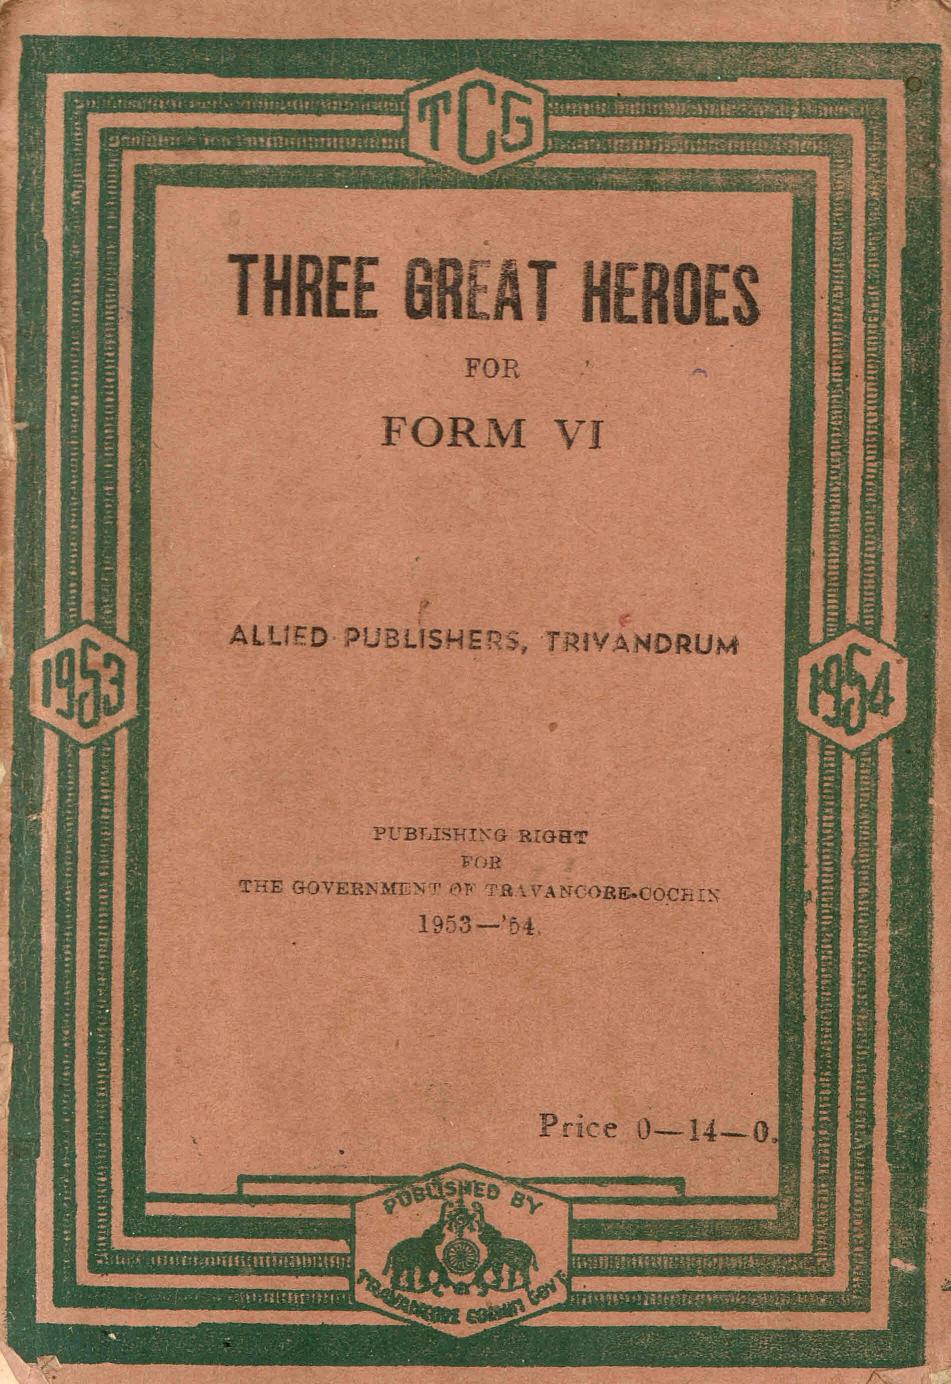 1953 - Three Great Heroes for Form VI